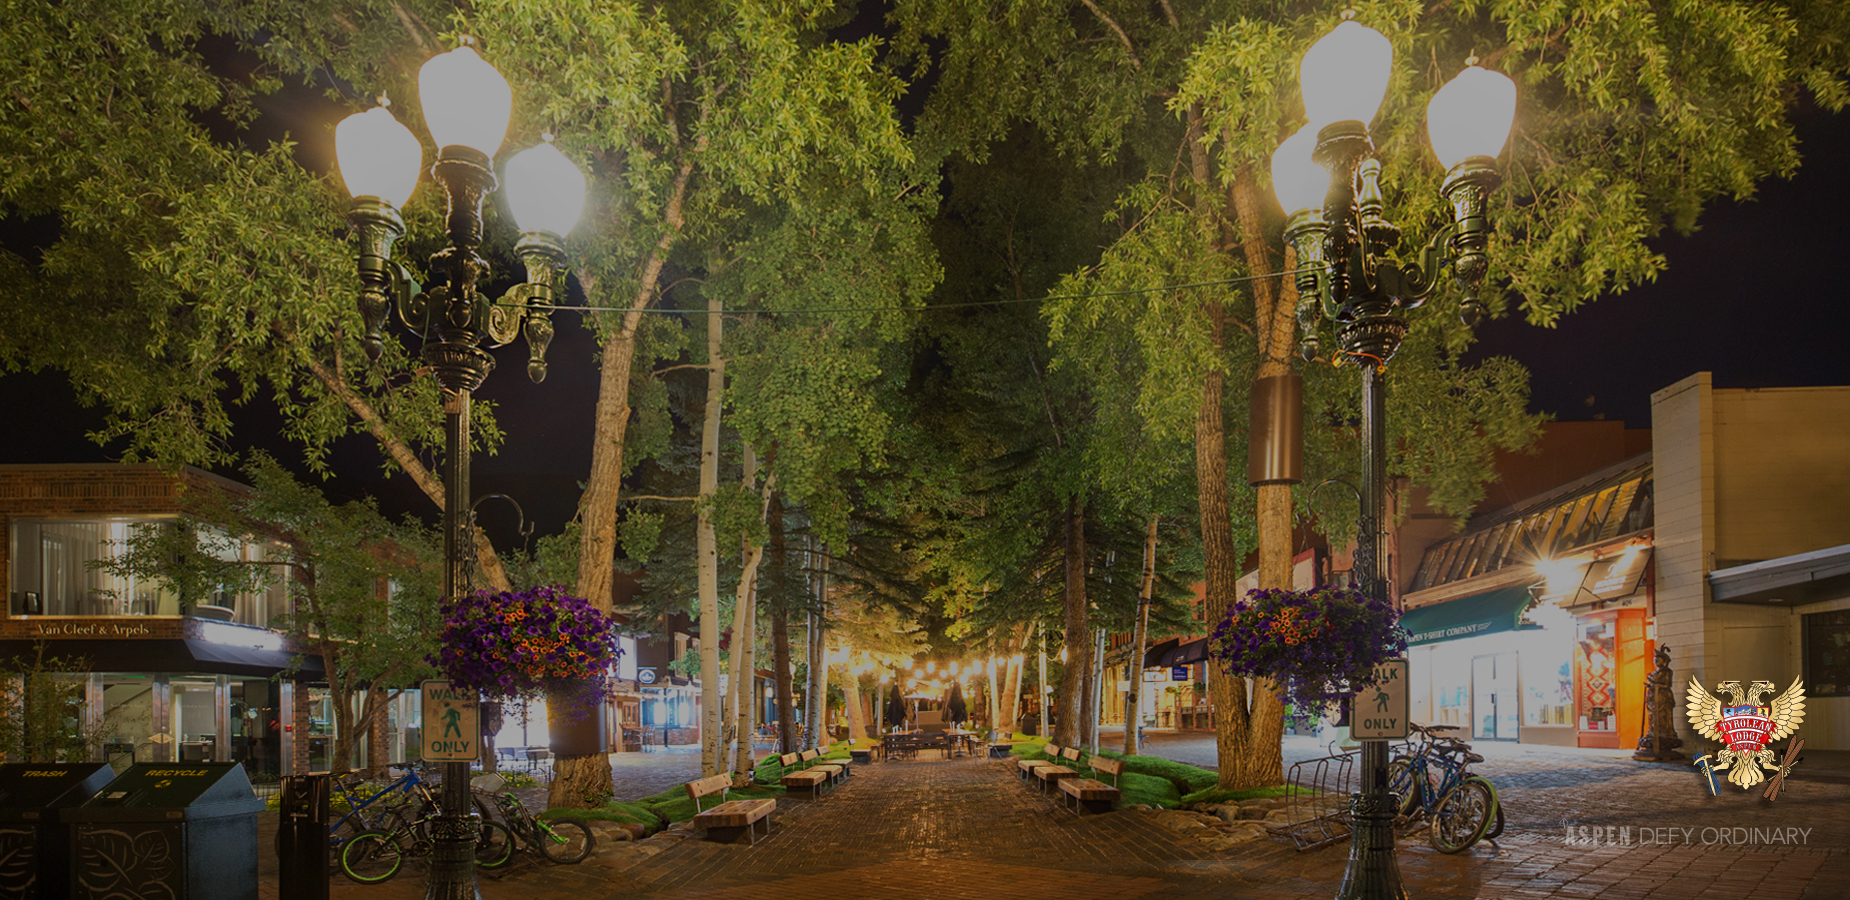 Undertrees lit up at night in Aspen's pedestrian mall